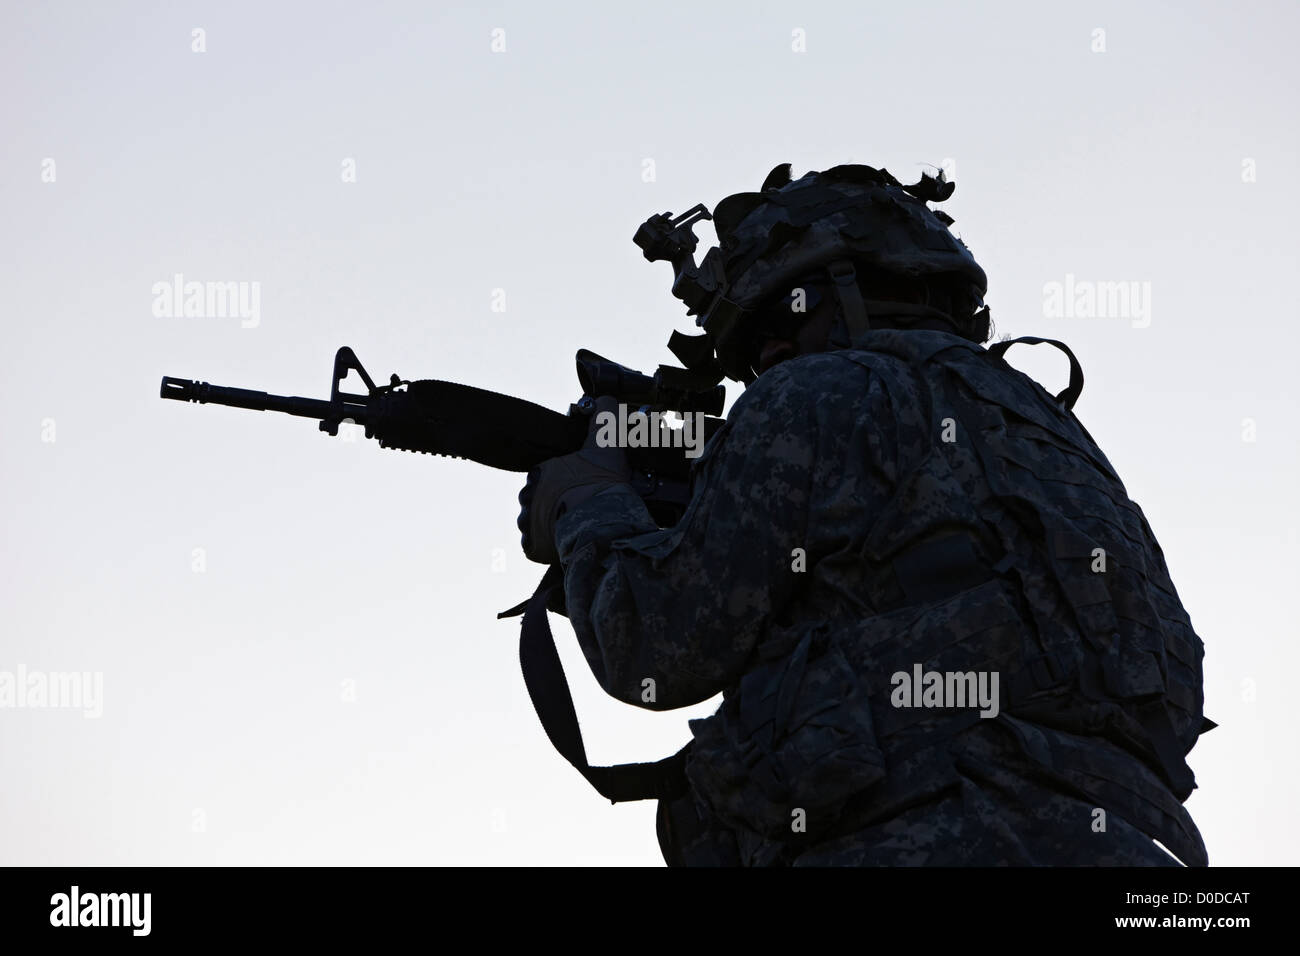 U.S. Army Soldier Aiming His Weapon at Sunrise Stock Photo